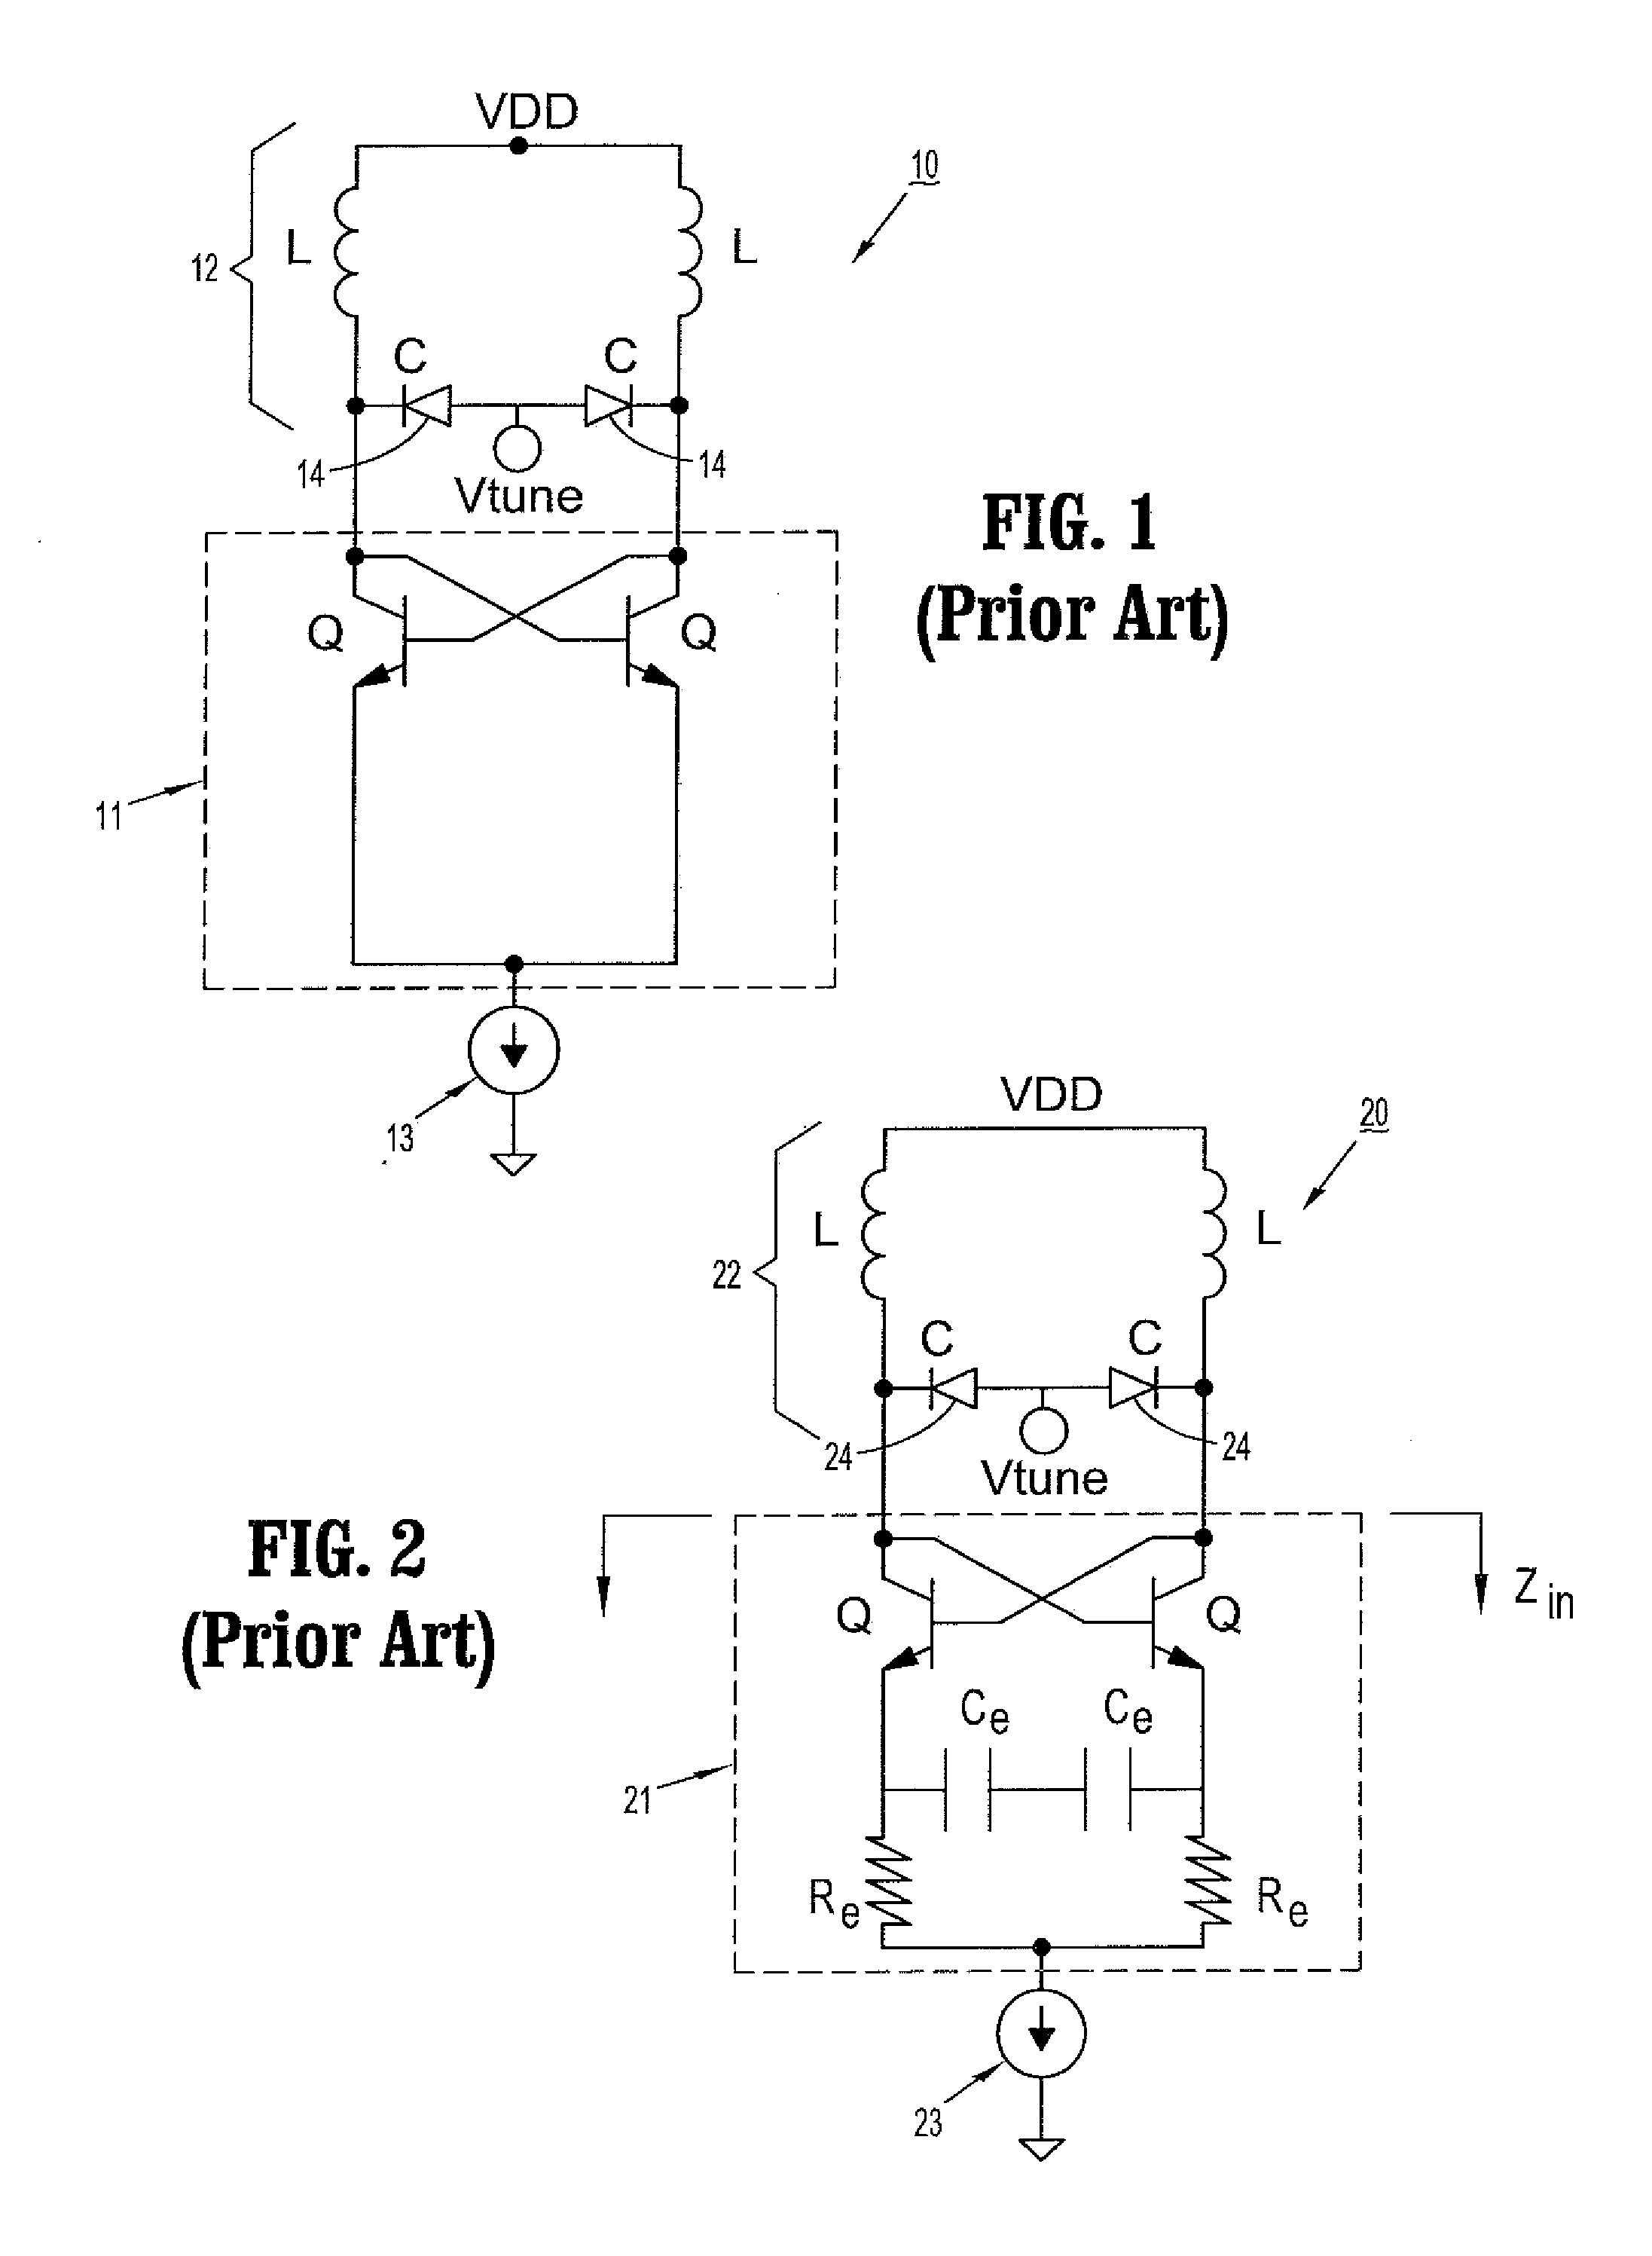 Voltage controlled oscillator circuits and methods using variable capacitance degeneration for increased tuning range